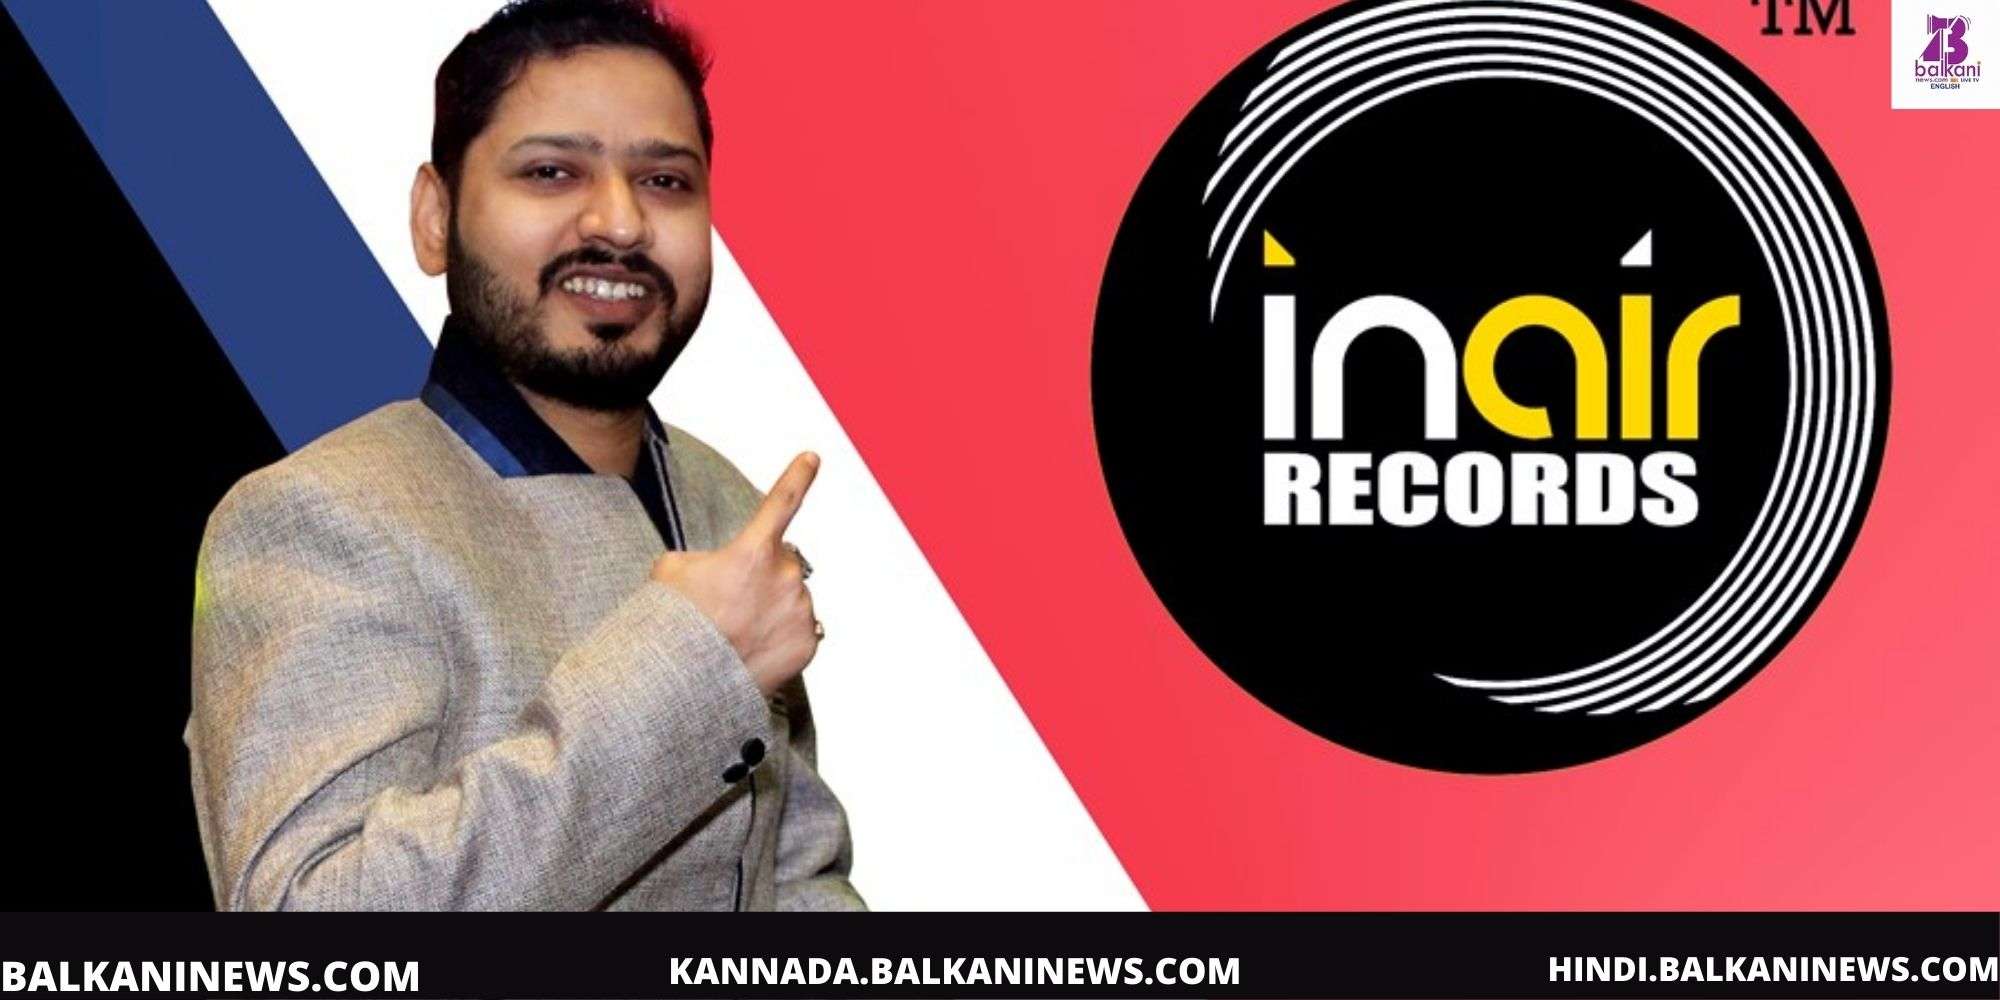 "Entrepreneur Rohit Yoge launches his own music label ‘InAir Records".